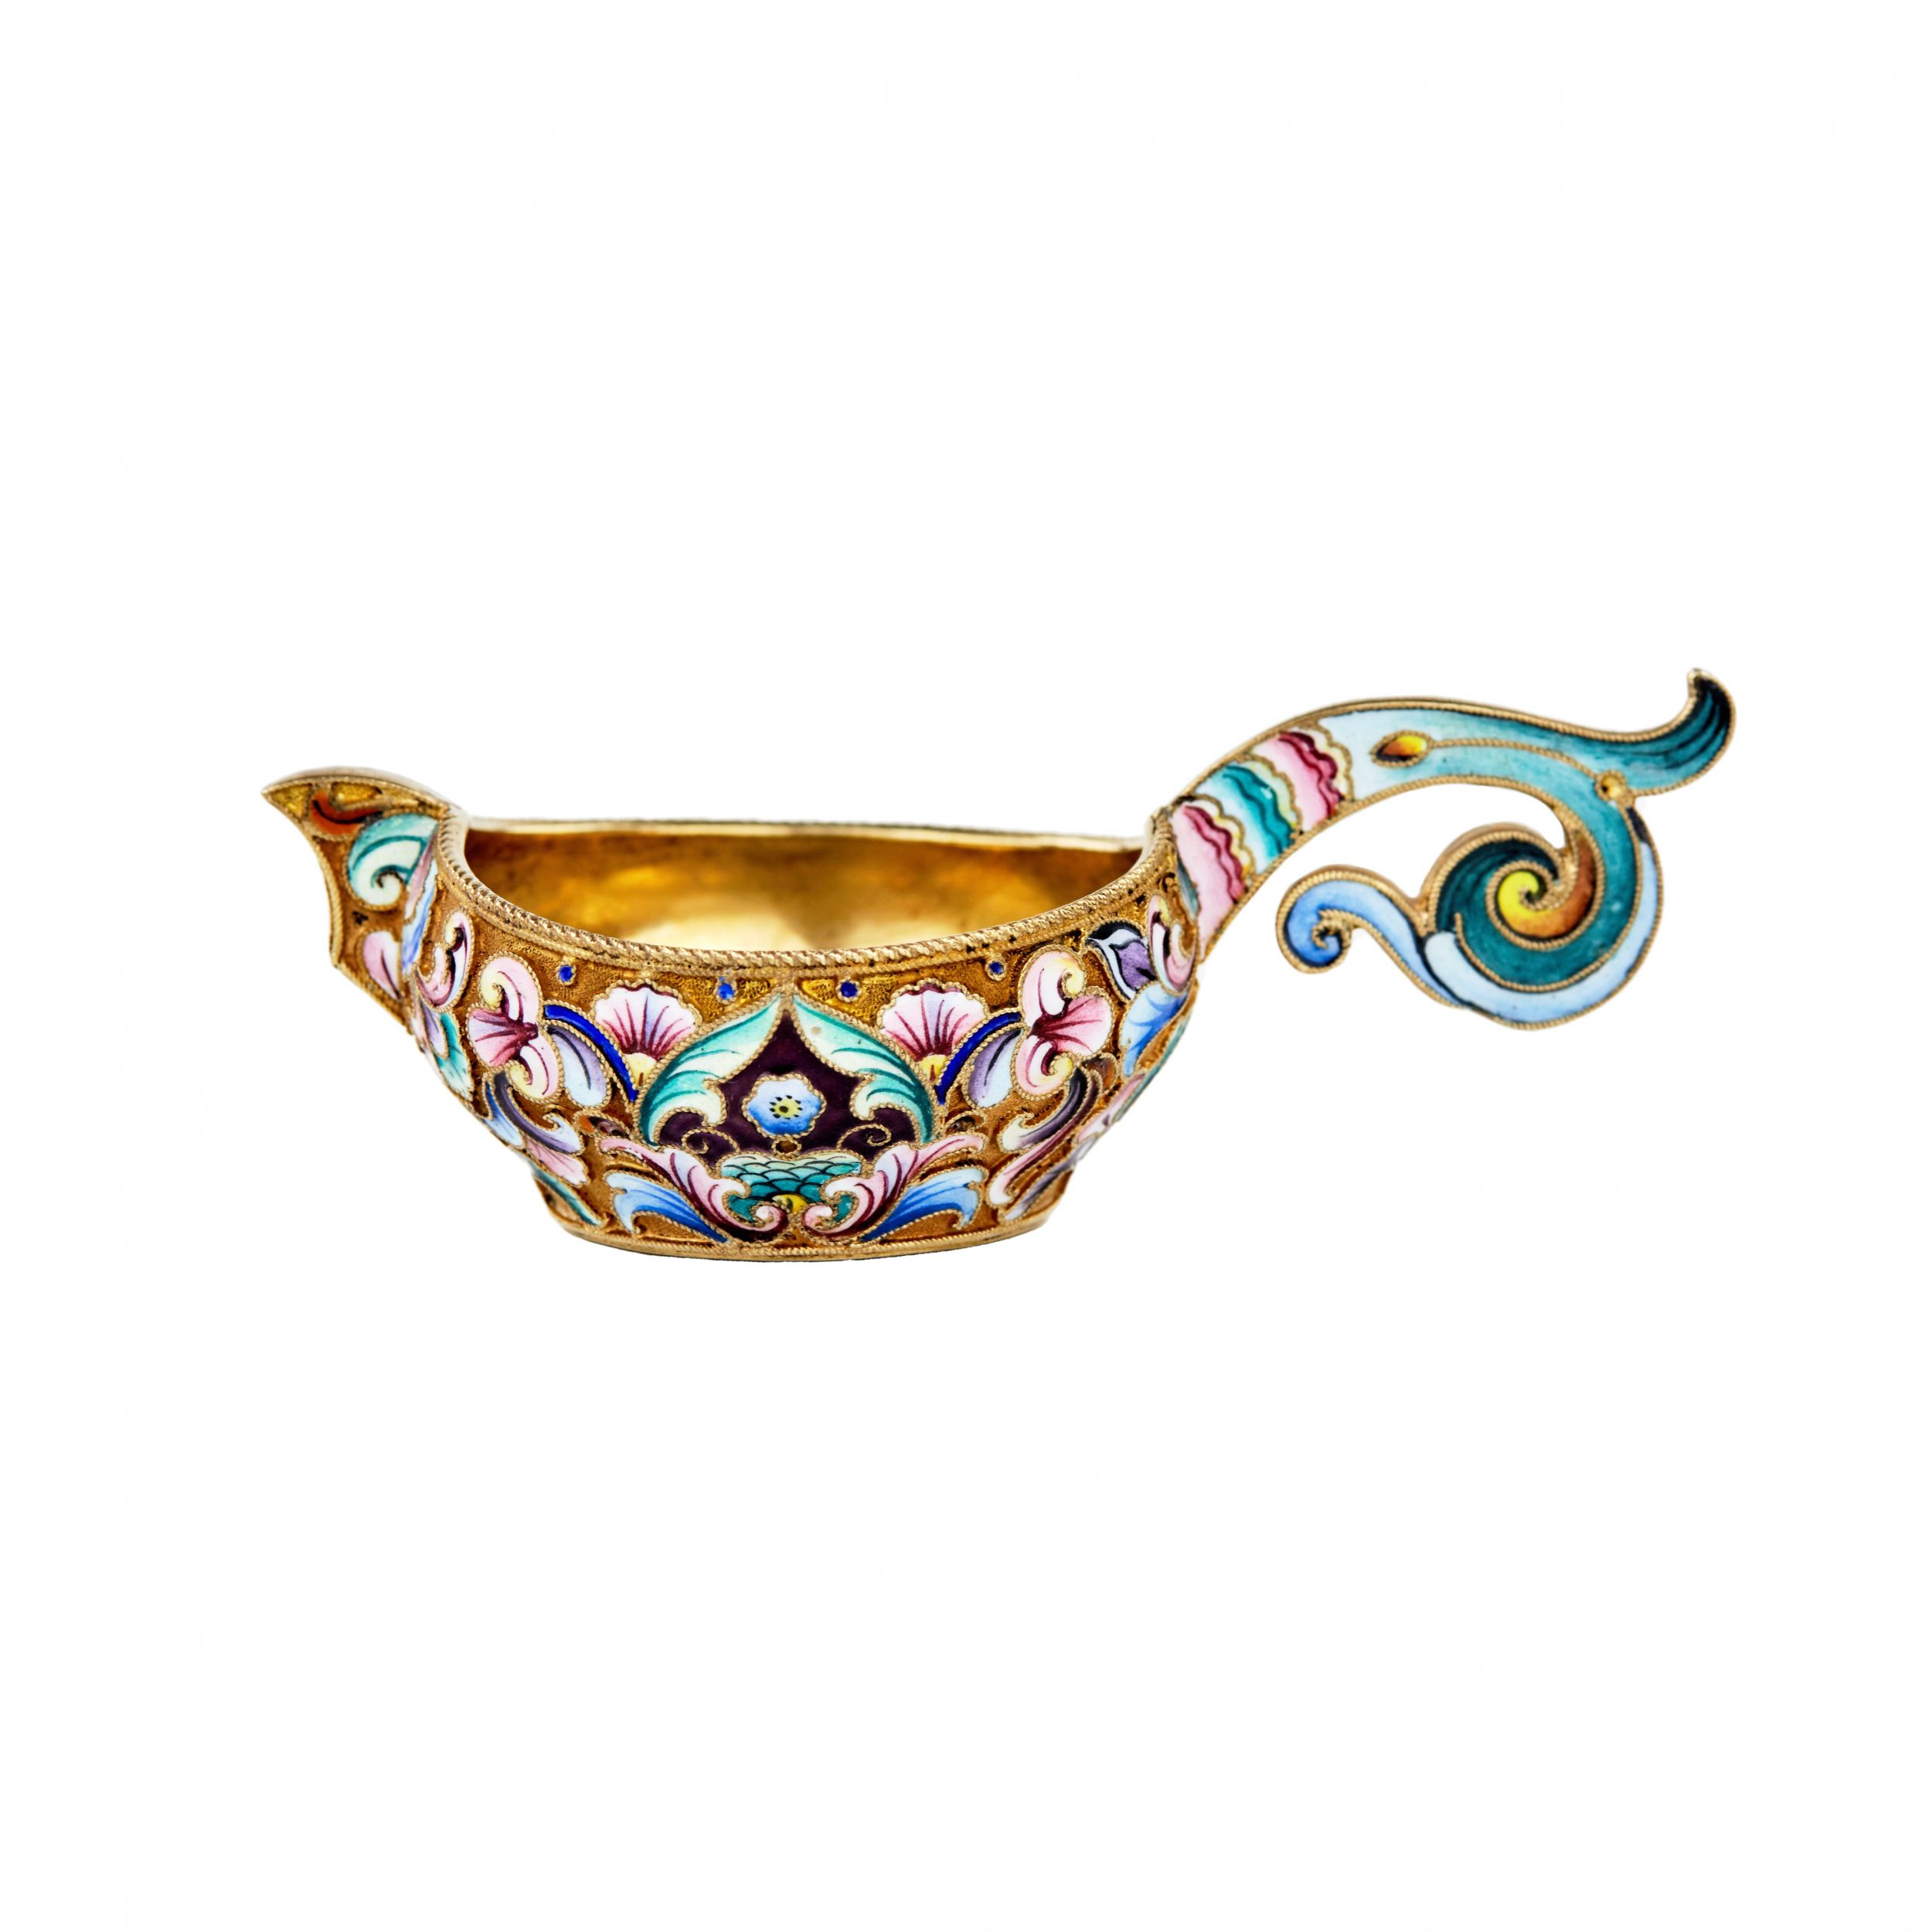 Silver-Kovsh-with-painted-enamels-Moscow-20th-artel-1908-1917-